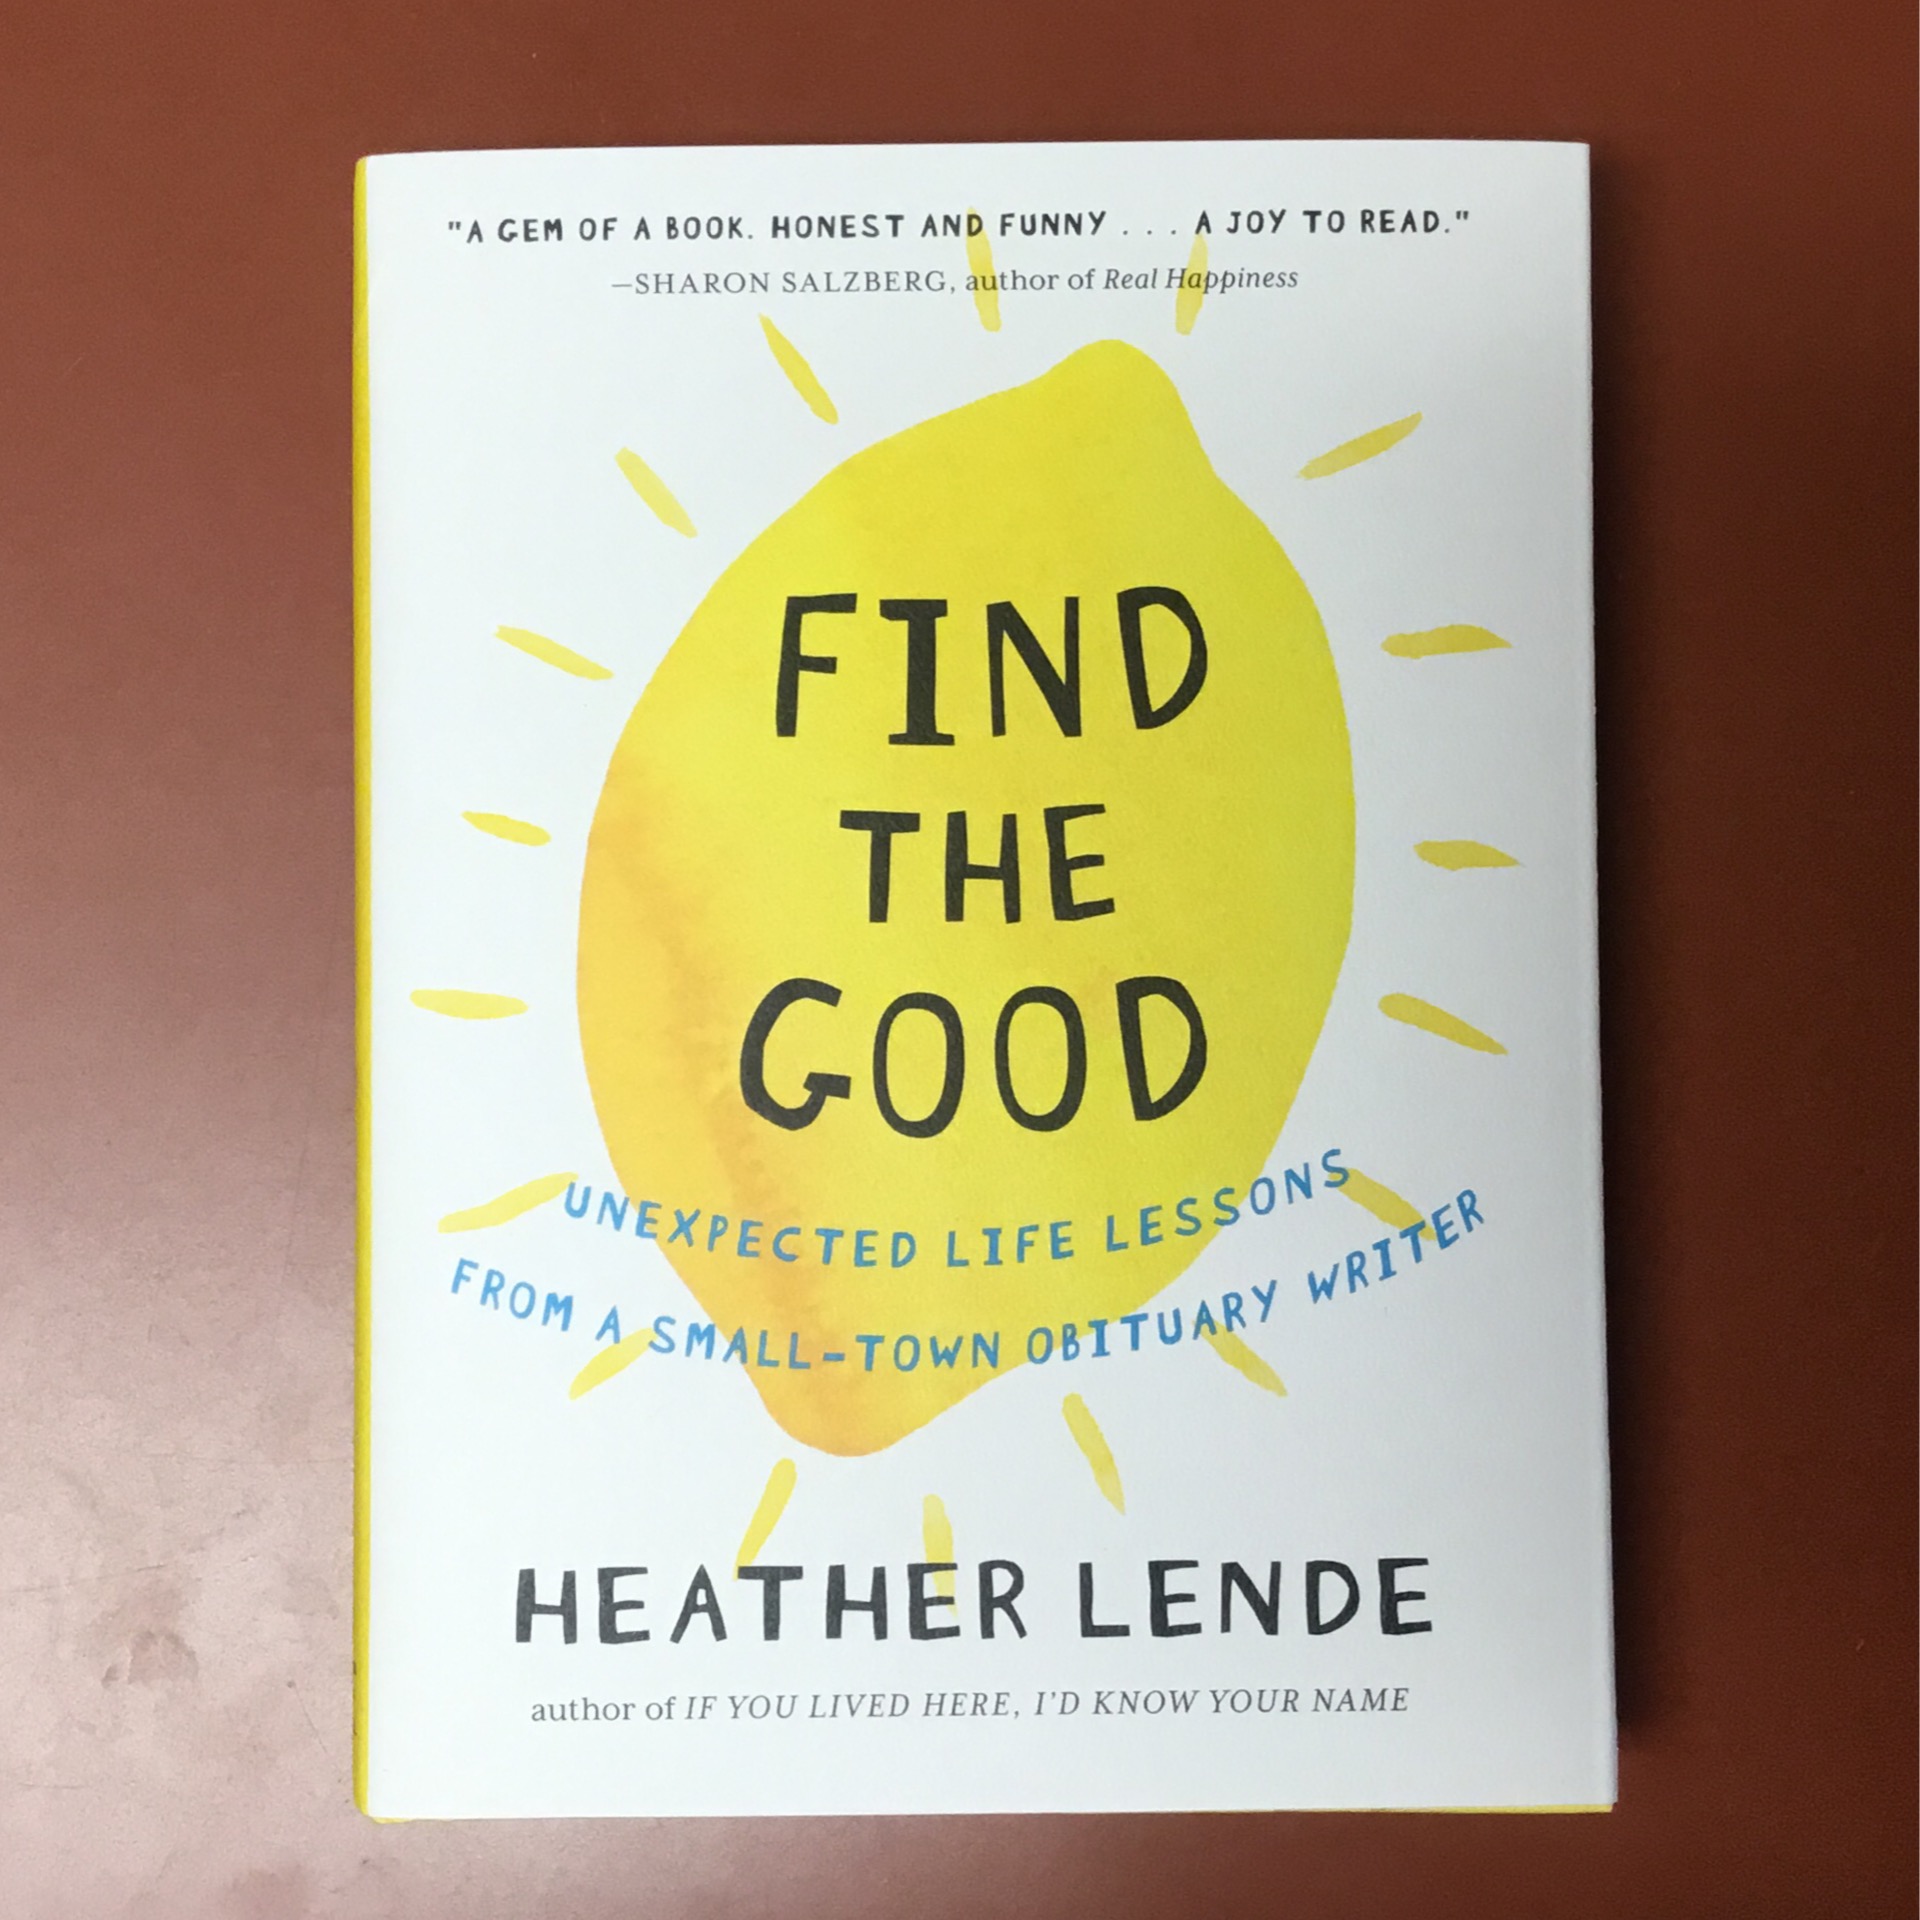 Find the Good: Unexpected Life Lessons From A Small Town